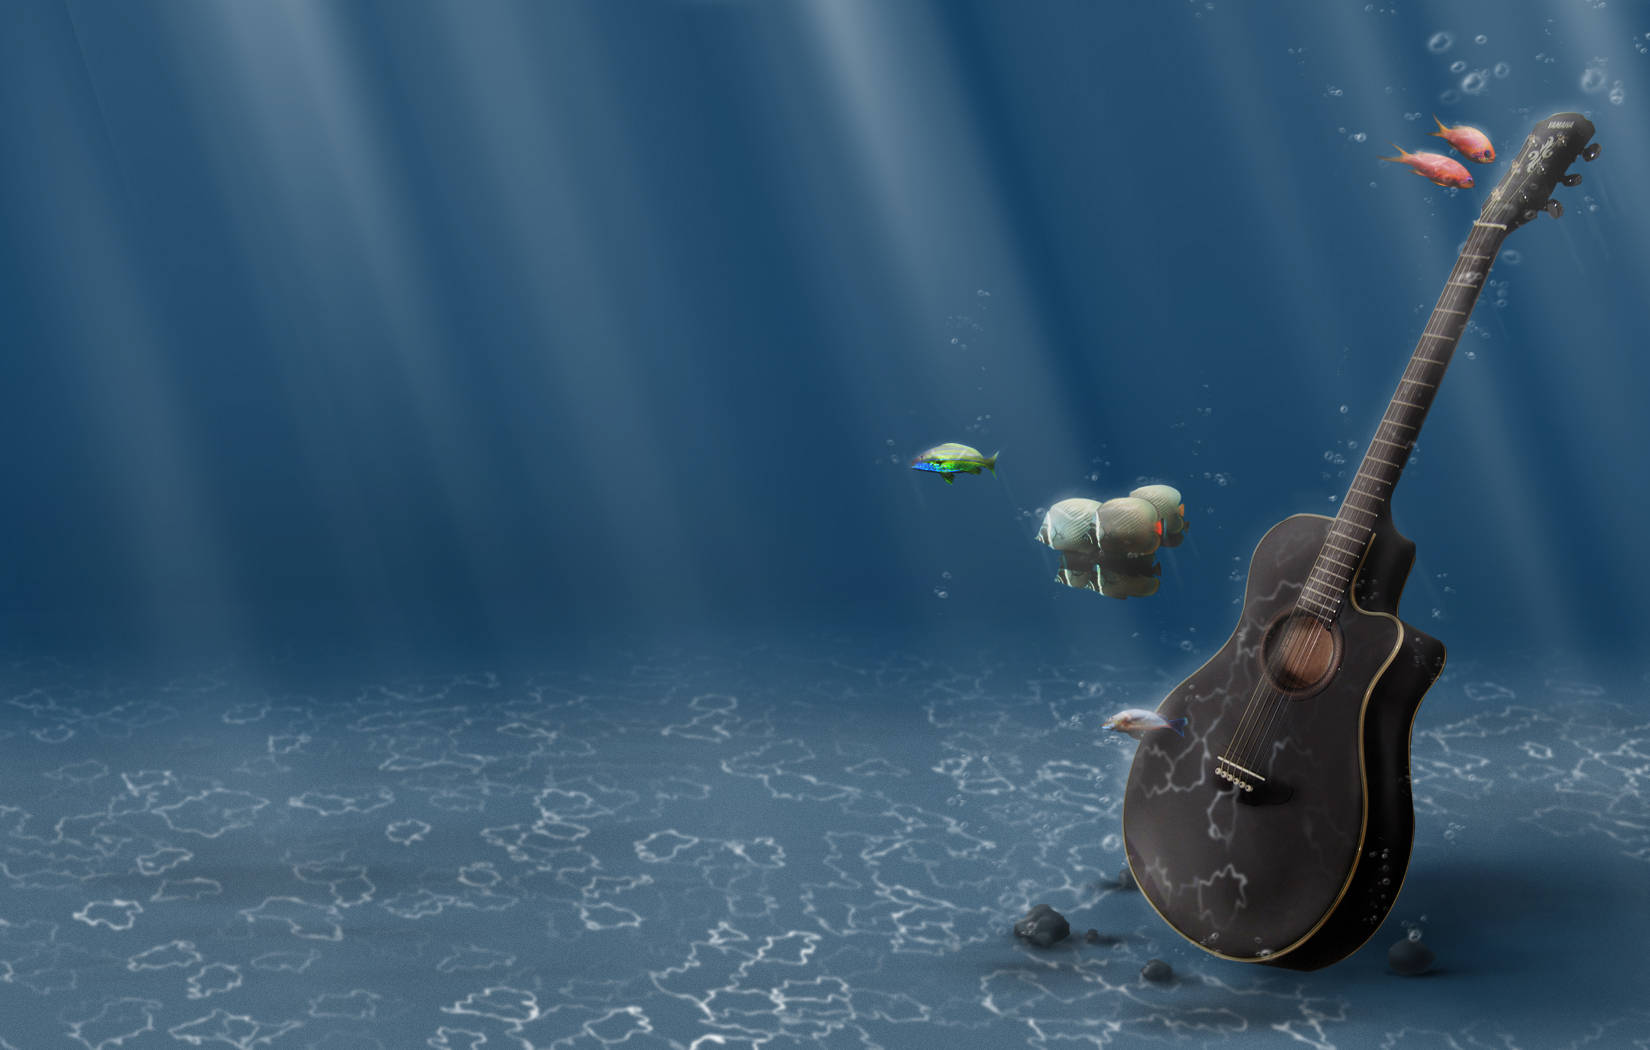 HD Fishes And Guitar Underwater Wallpaper